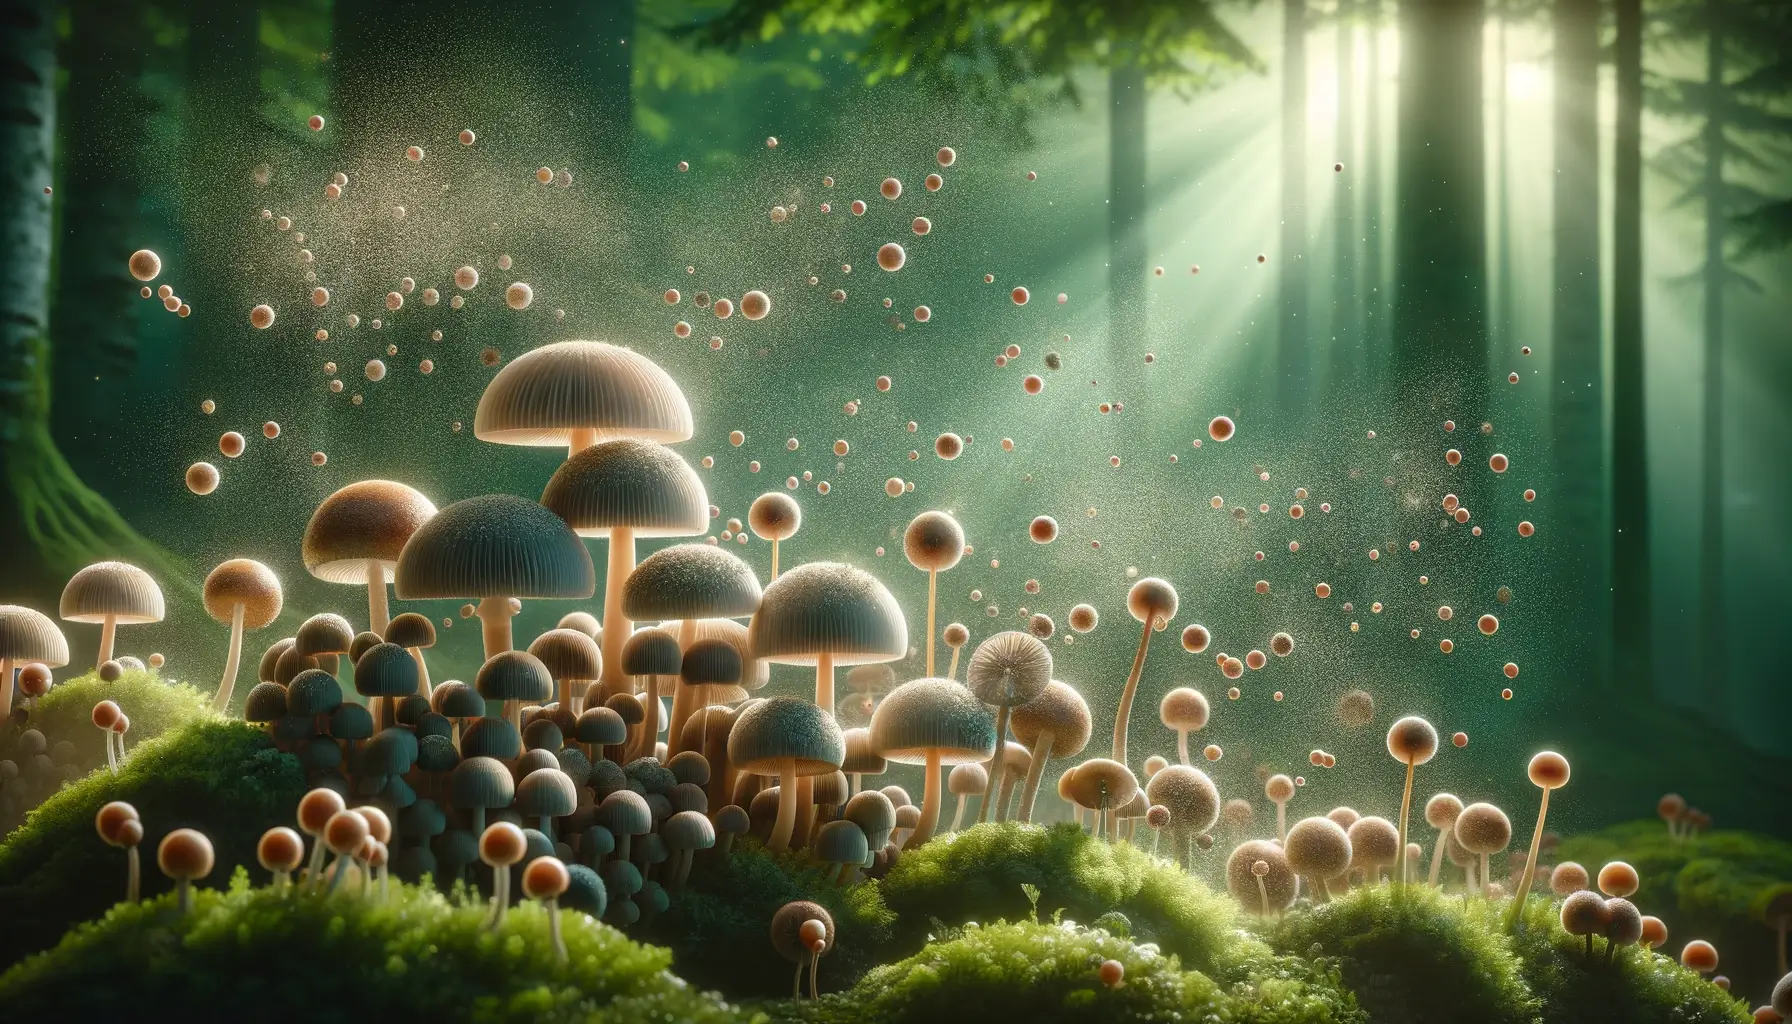 A captivating 16:9 landscape image illustrating the concept of mushroom spores. The scene depicts a close-up view of a variety of mushrooms in their natural forest habitat. Some mushrooms are releasing spores into the air, visible as fine, mist-like particles. The background features a lush, green forest under soft, diffused sunlight, highlighting the intricate details of the mushroom caps and spores, showcasing the beauty and complexity of fungal reproduction.